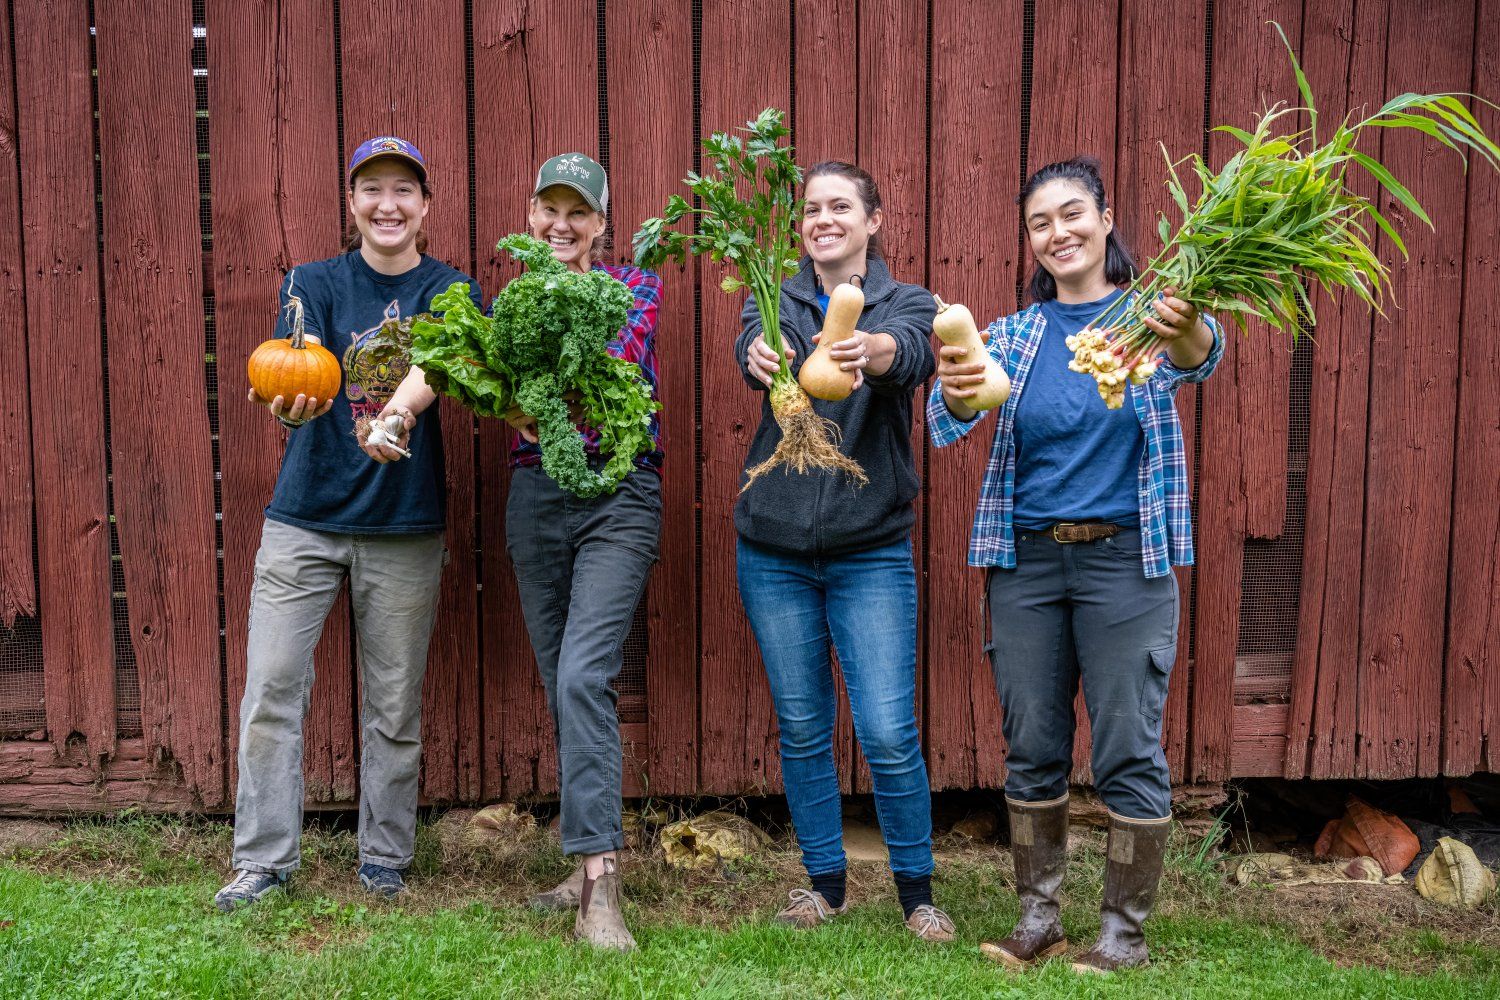 Previous Happening: Farm Happenings for October 28, 2021